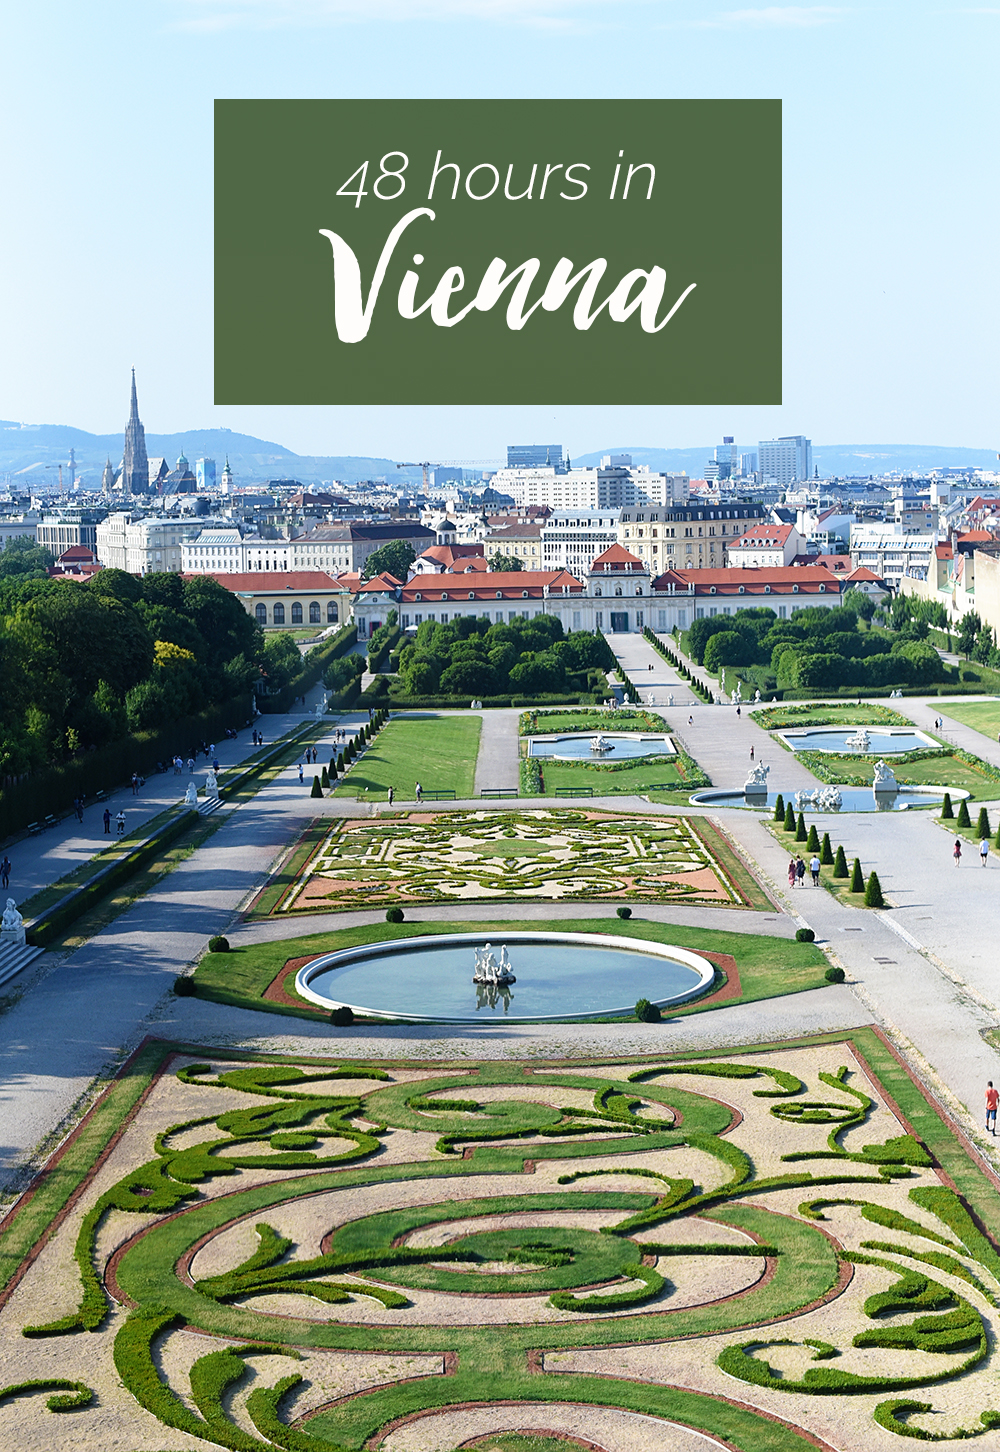 Travel guide for two days (48 hours) in Vienna, Austria